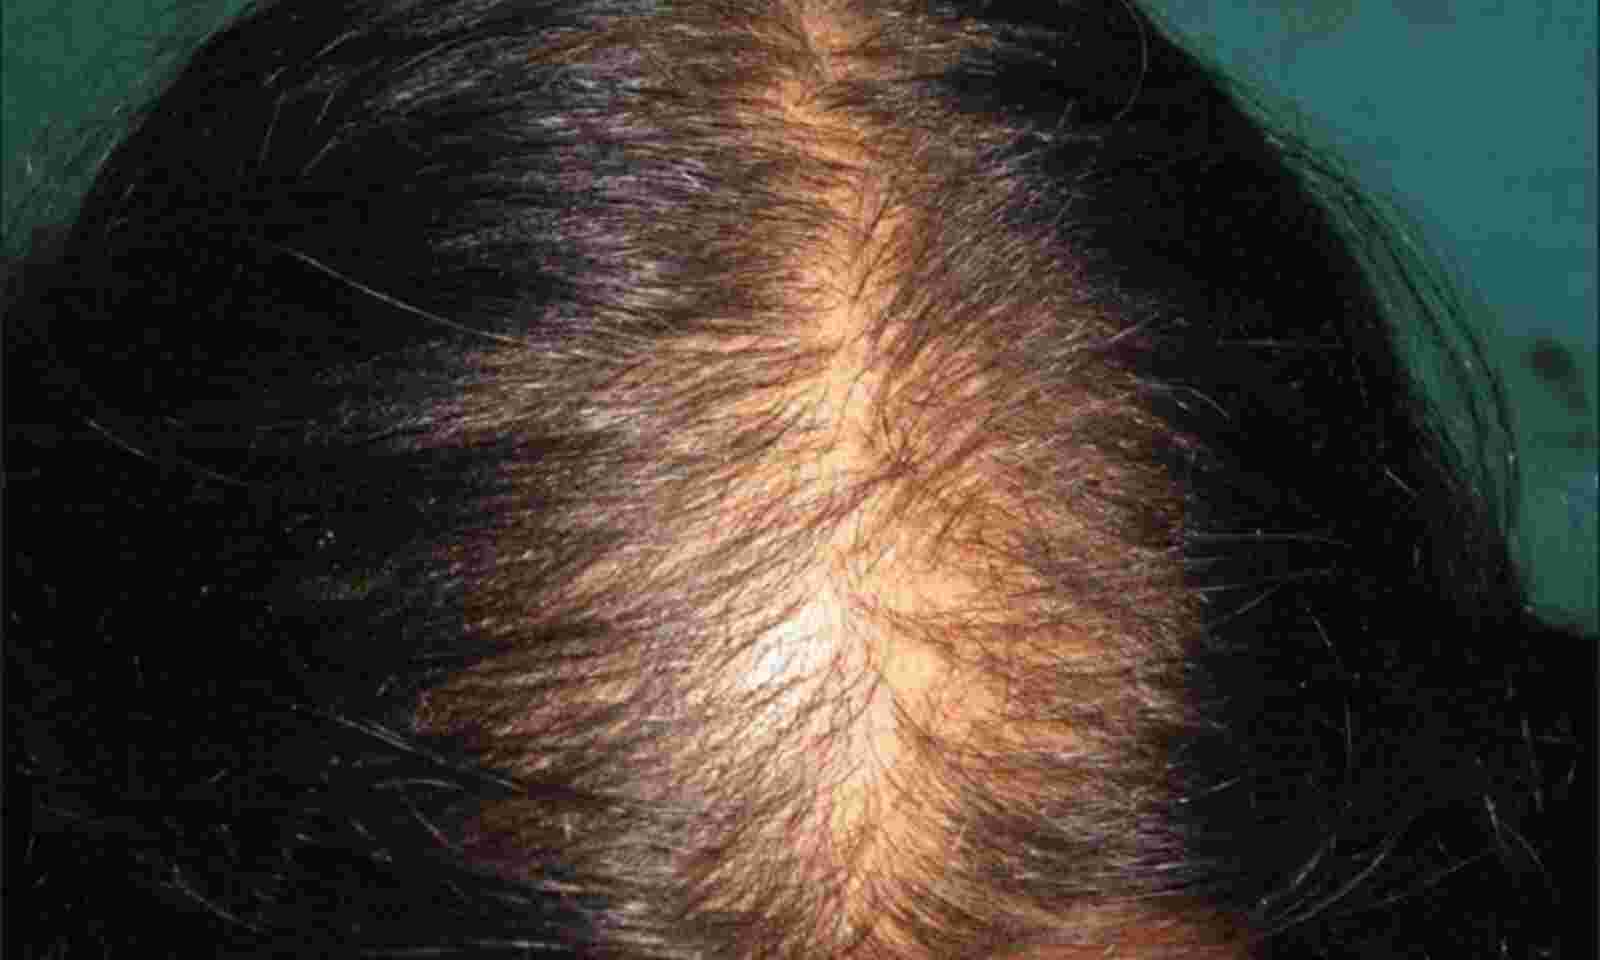 Towards a consensus on how to diagnose and quantify female pattern hair loss   The Female Pattern Hair Loss Severity Index FPHLSI  Harries  2016   Journal of the European Academy